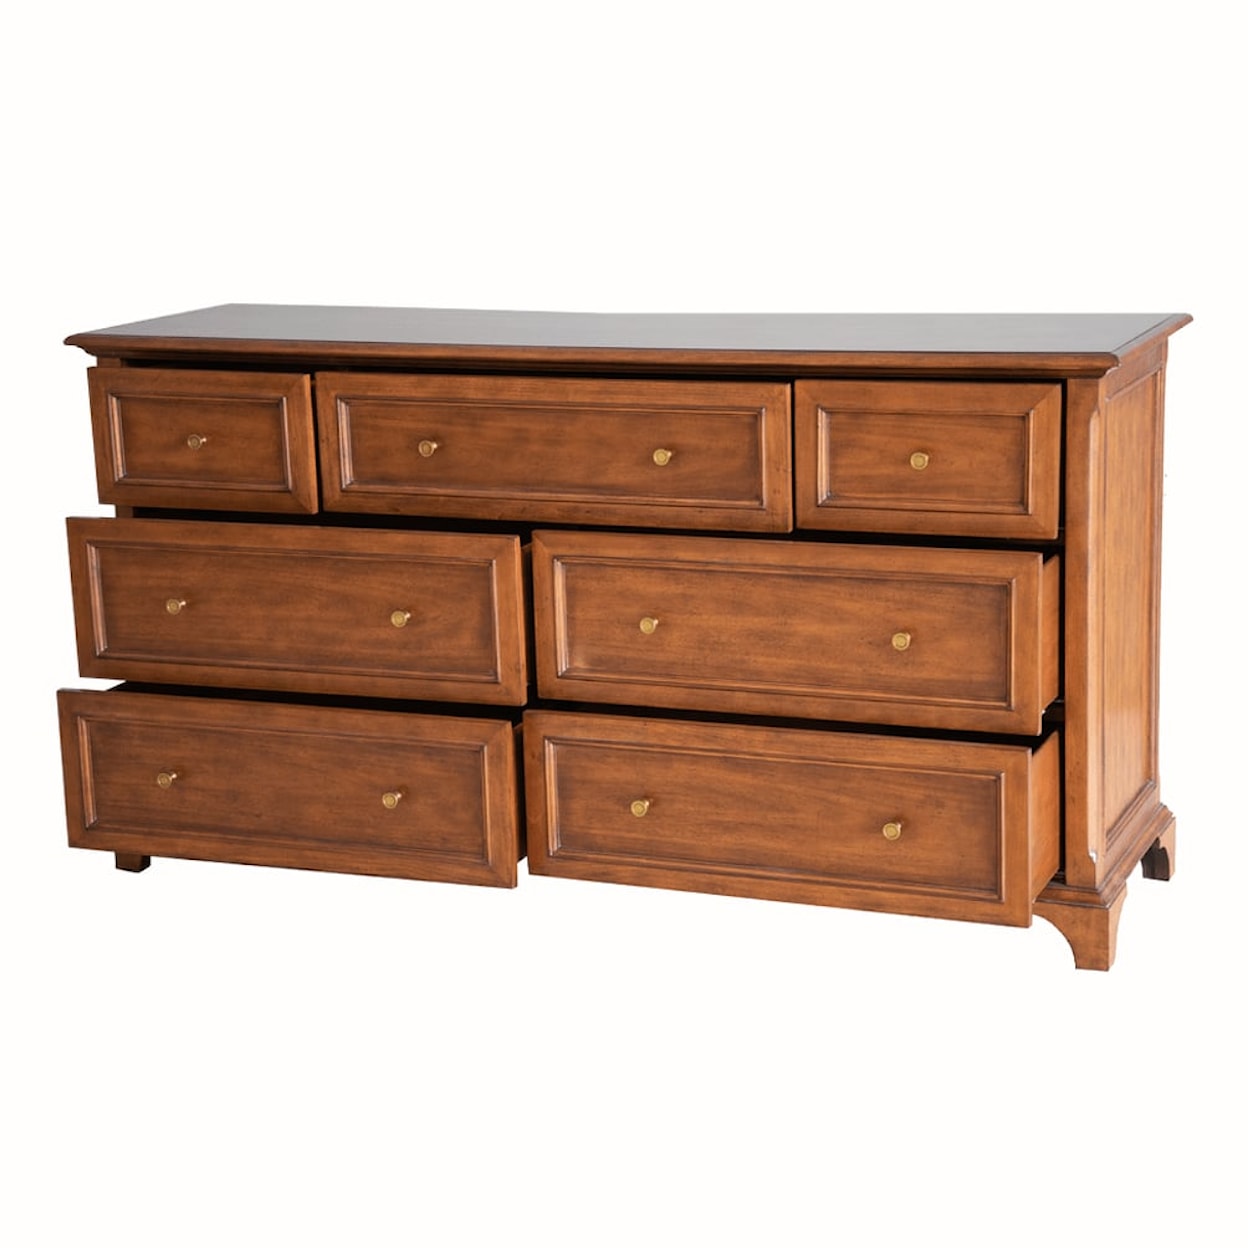 Oliver Home Furnishings Dressers Six Drawer Country Dresser